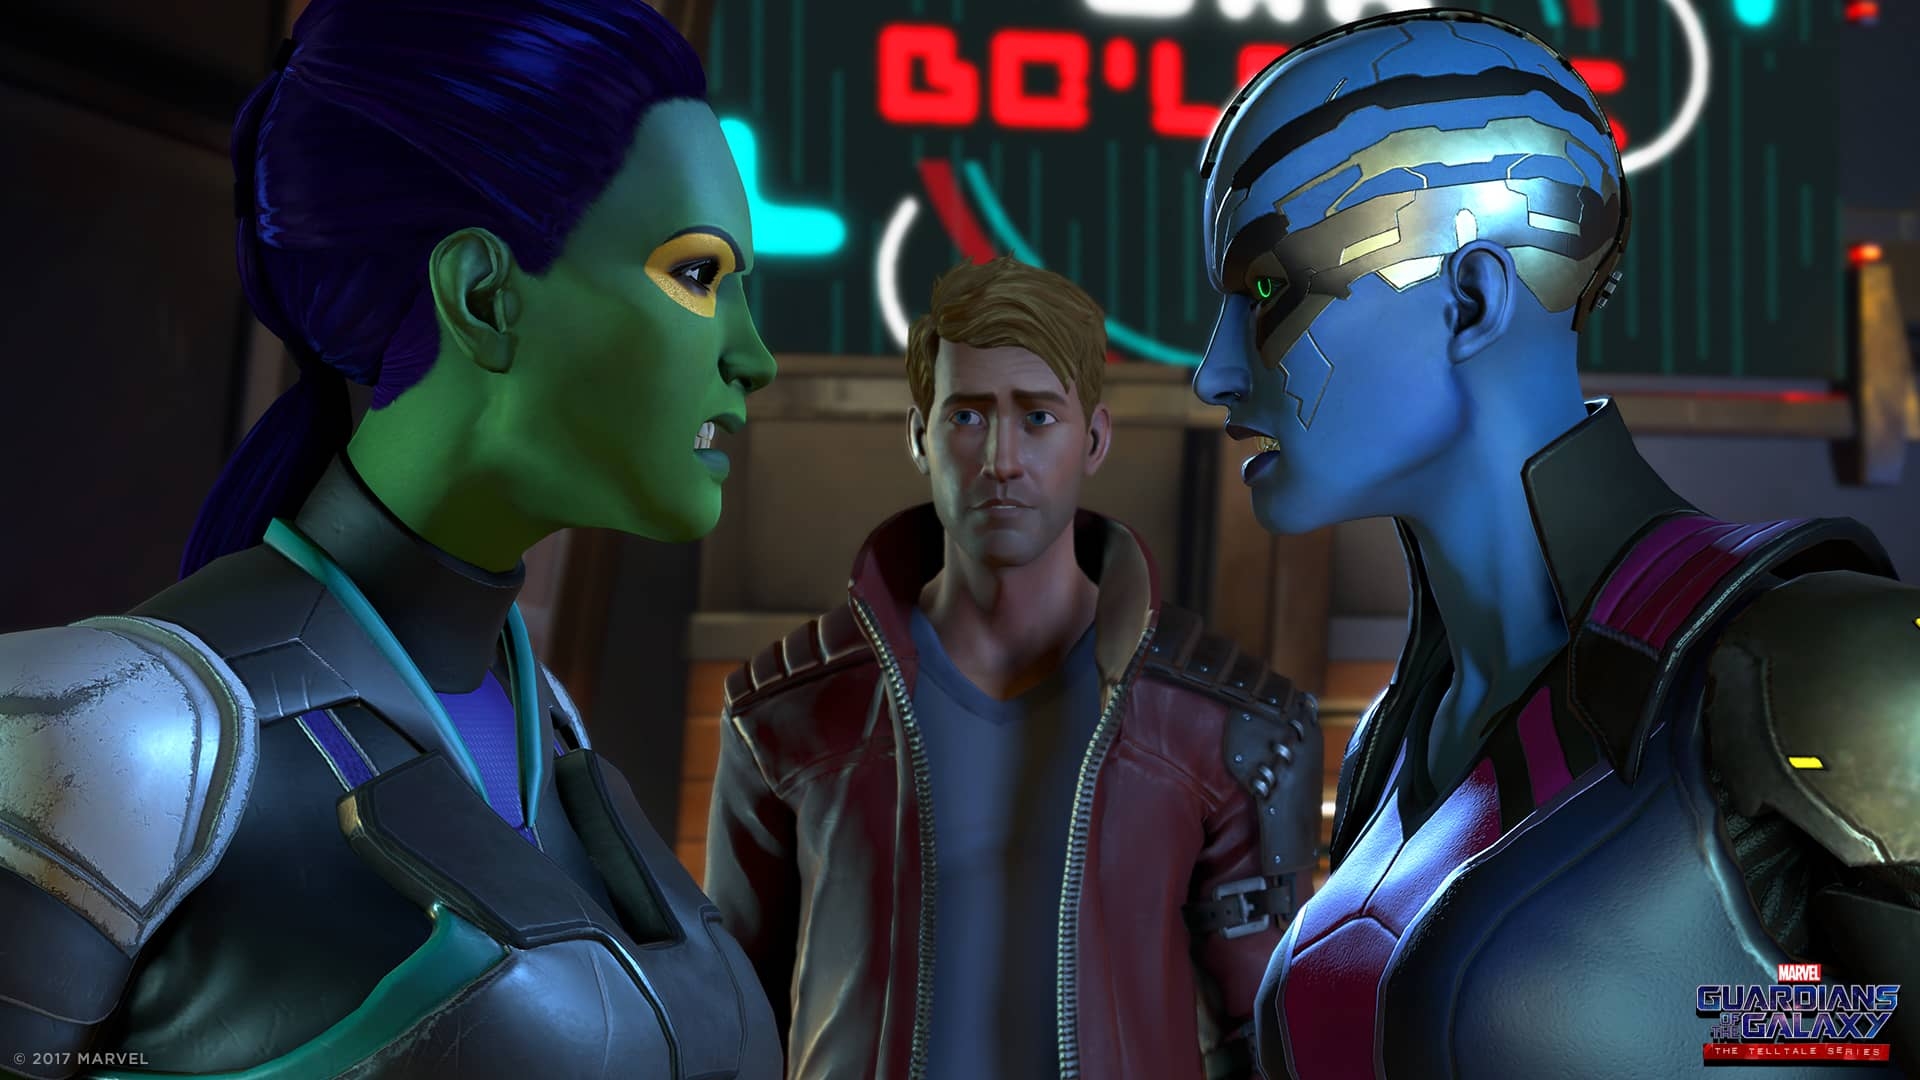 Marvel's Guardians of the Galaxy: The Telltale Series Episode III